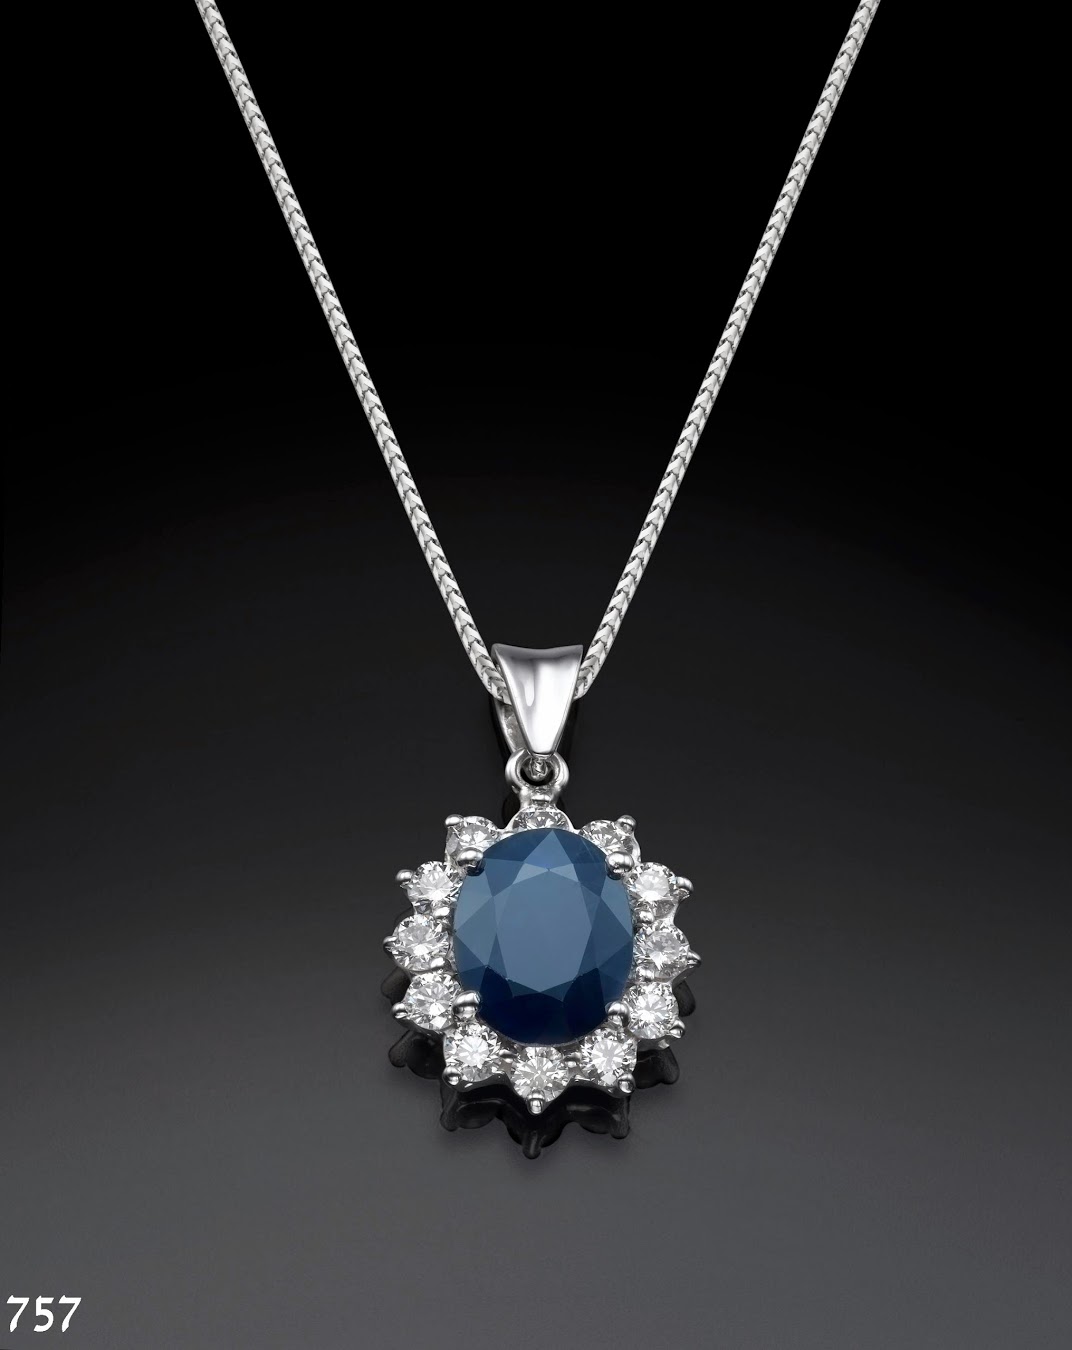 Oval blue sapphire necklace with diamonds